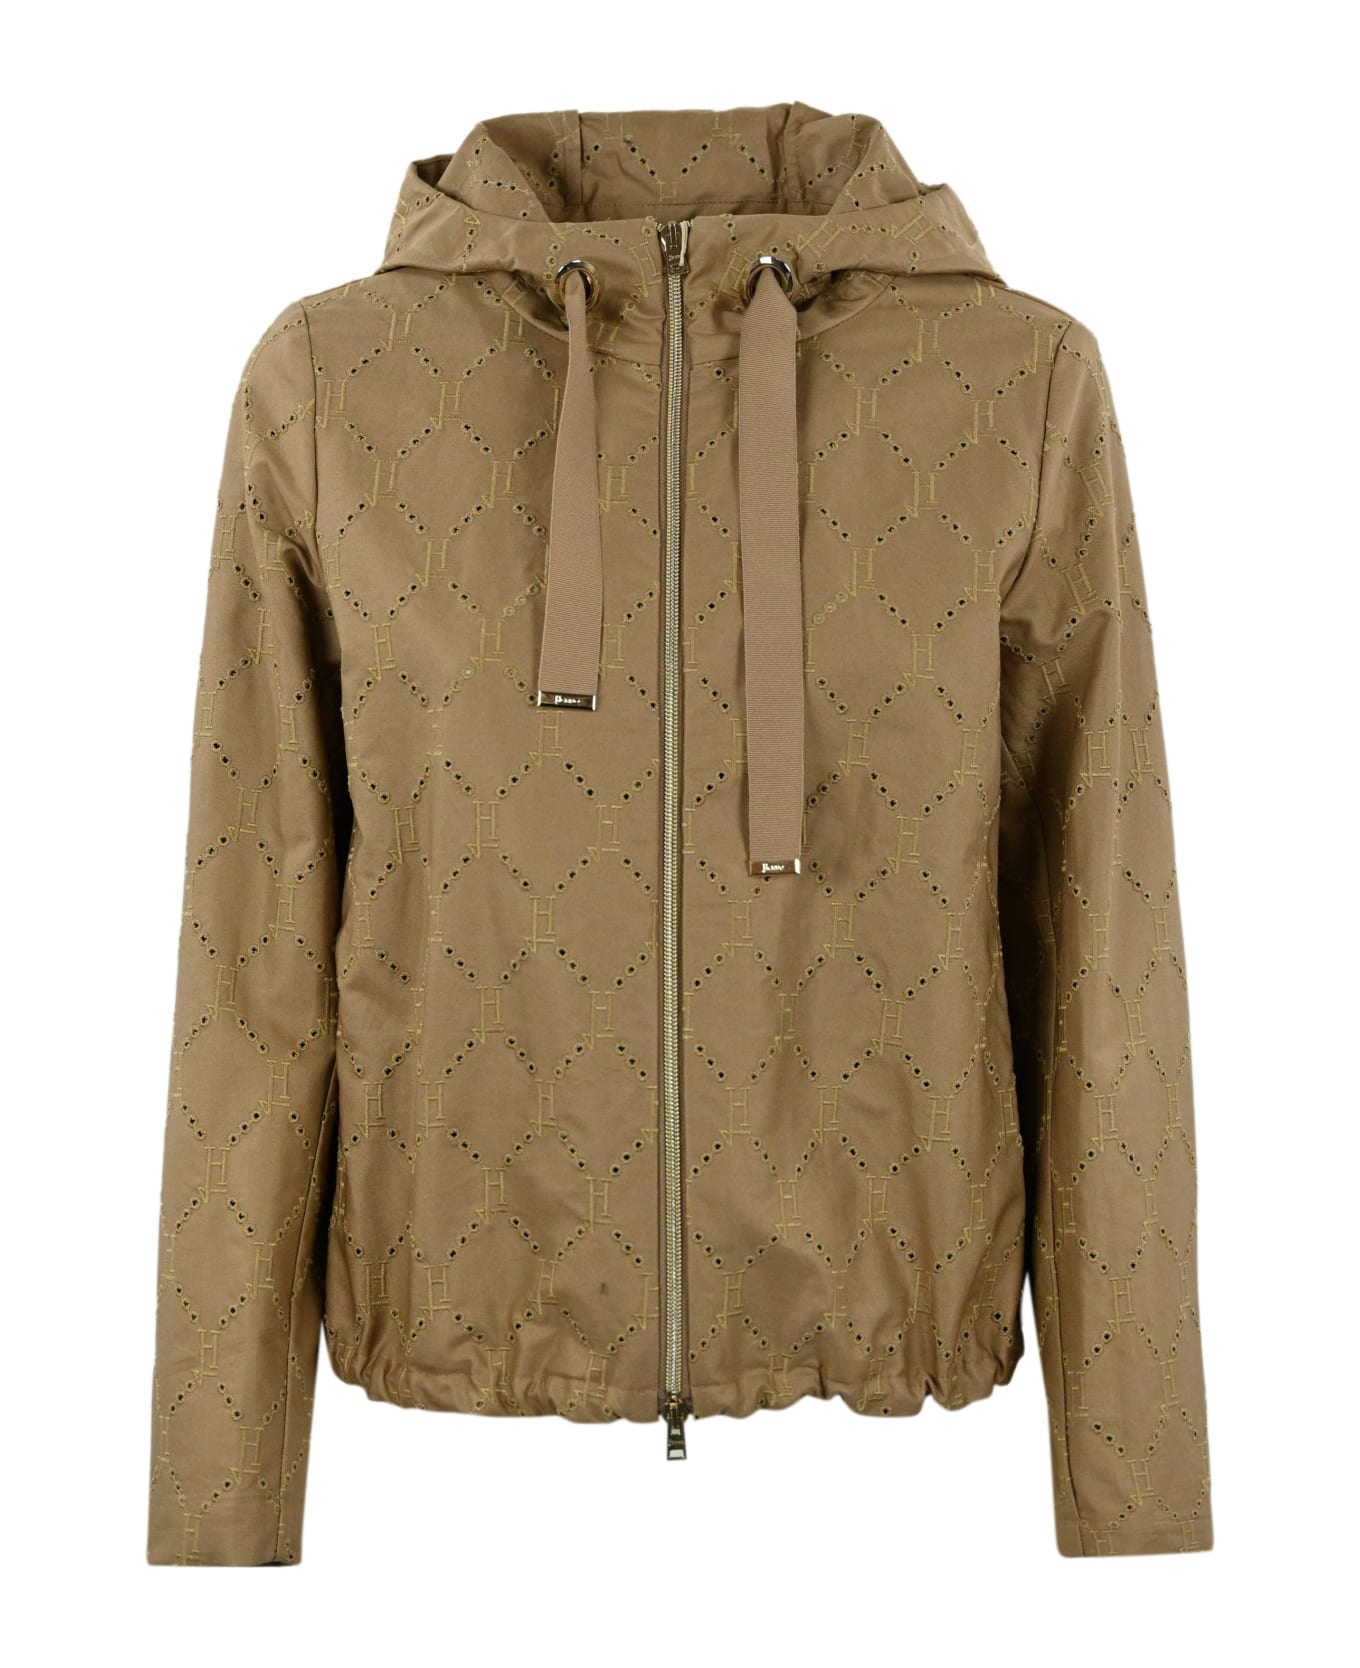 Herno Perforated Jacket With Hood - BROWN